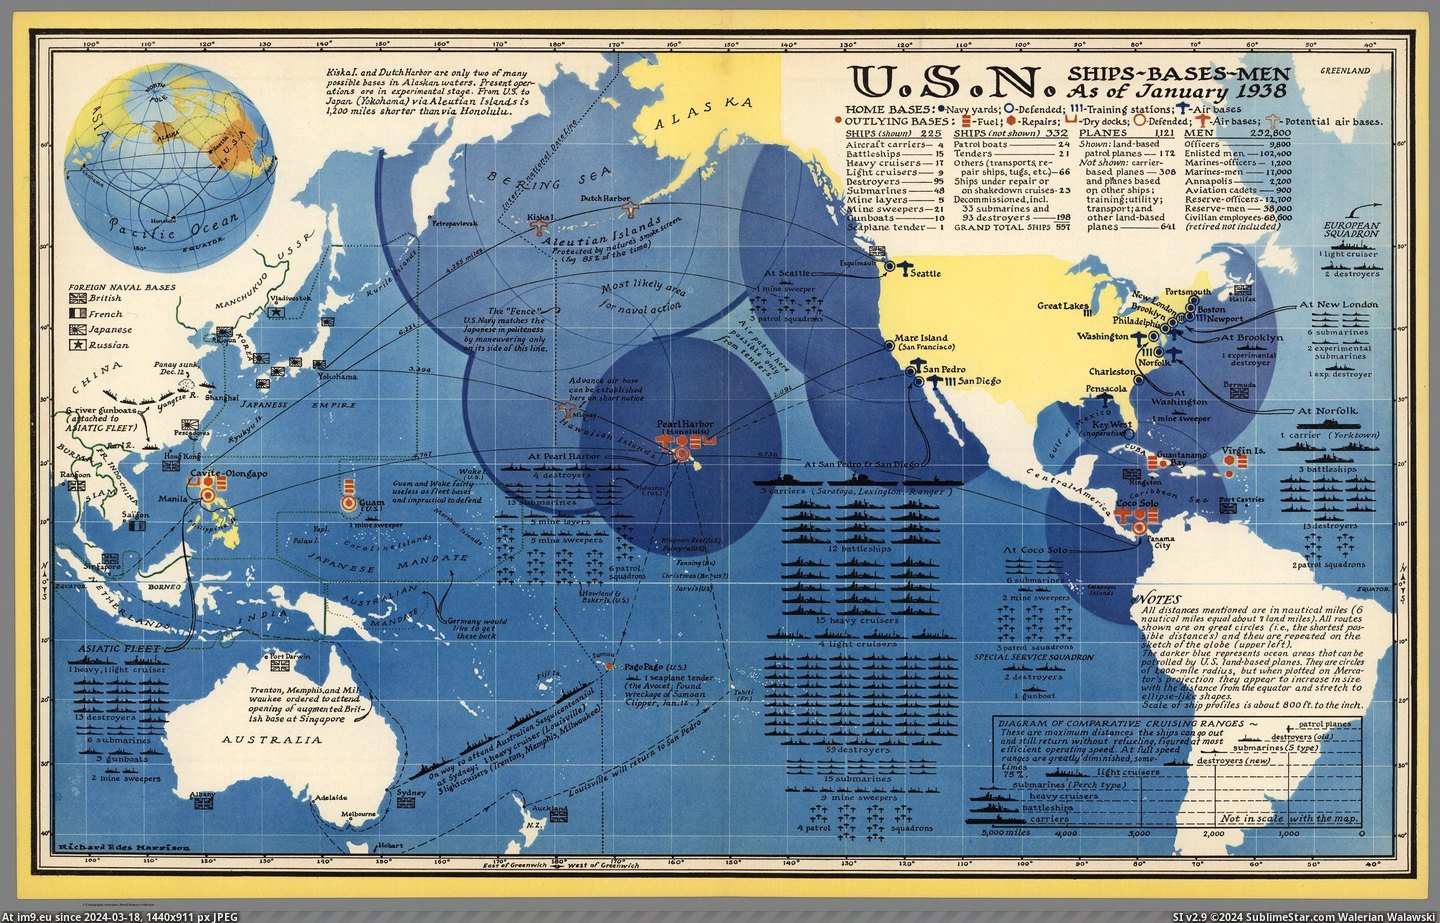 #States #Men #Navy #Ships #Bases #United #Military [Mapporn] The United States Navy. Ships, bases and men as of January 1938 [5678x3605] ( -r-military) Pic. (Image of album My r/MAPS favs))